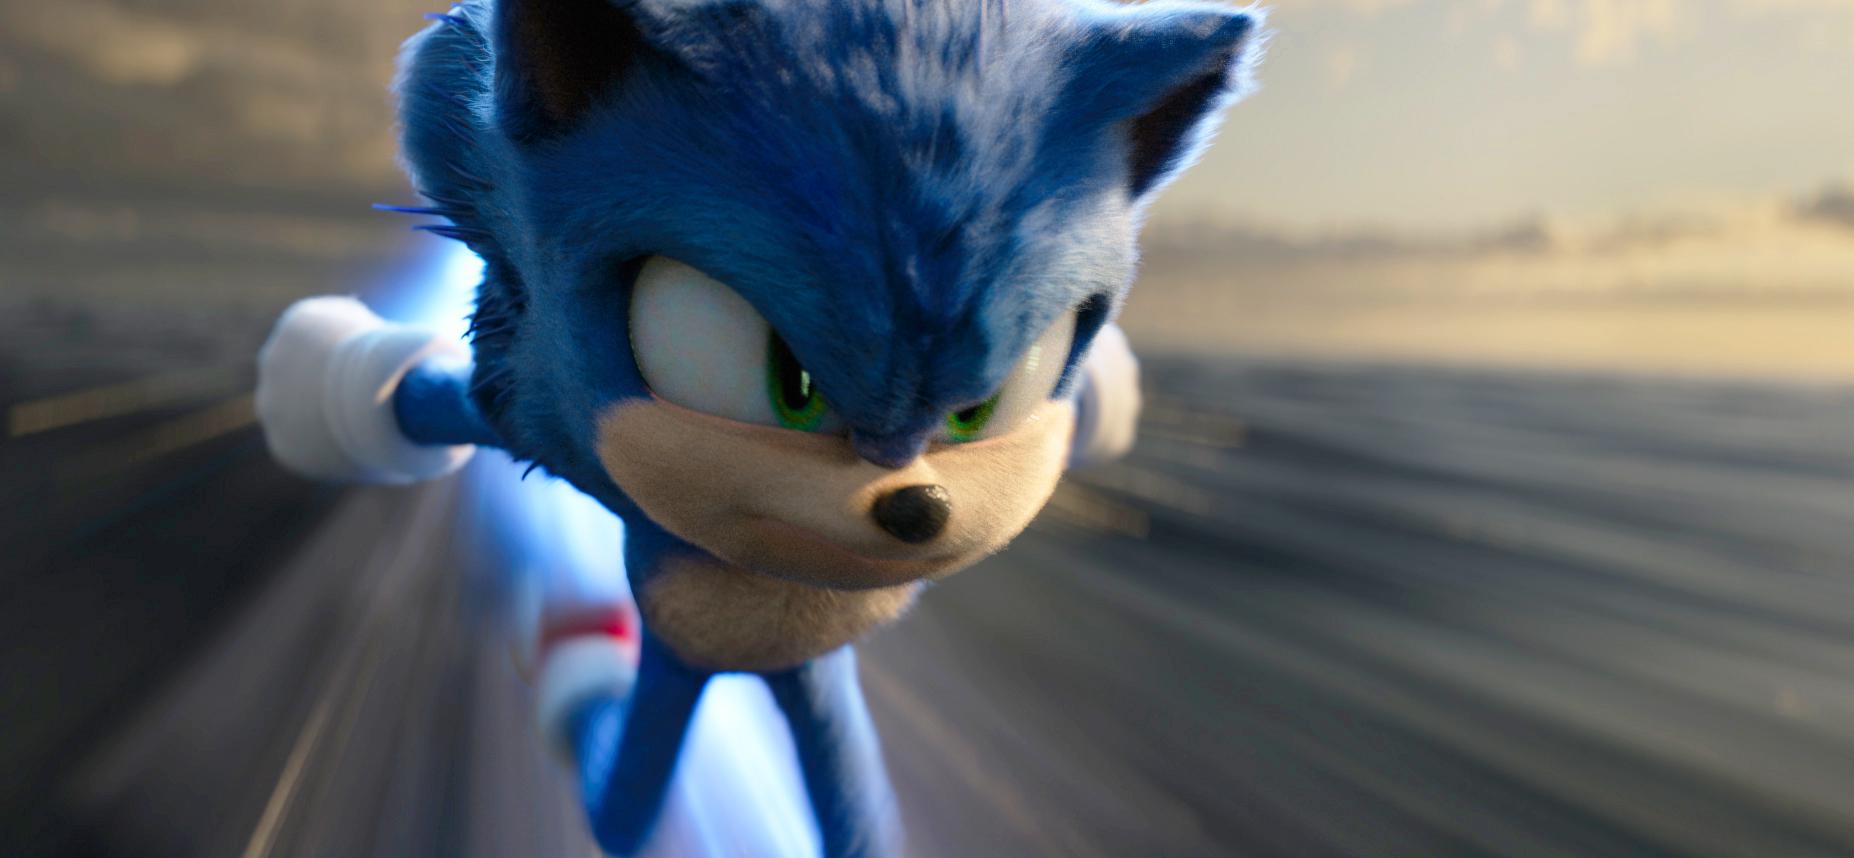 Sonic The Hedgehog 2 opened to $25.5m made in international theatres